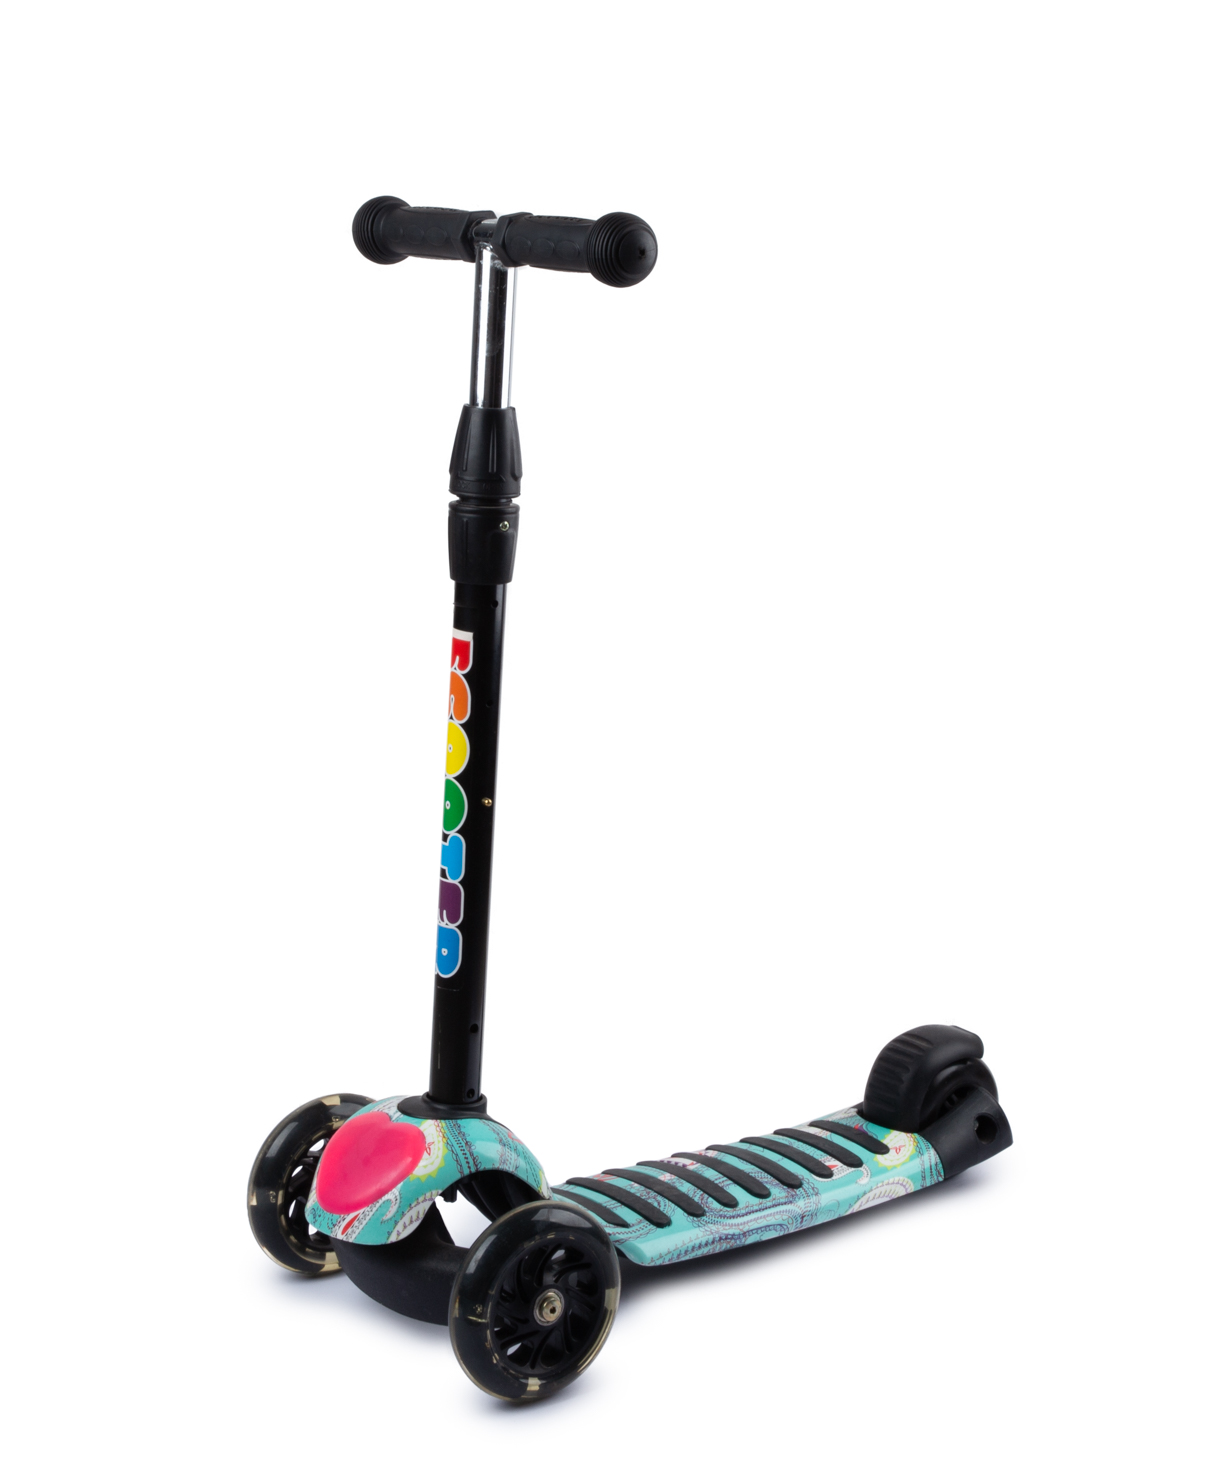 Scooter PE-9910 with light effect